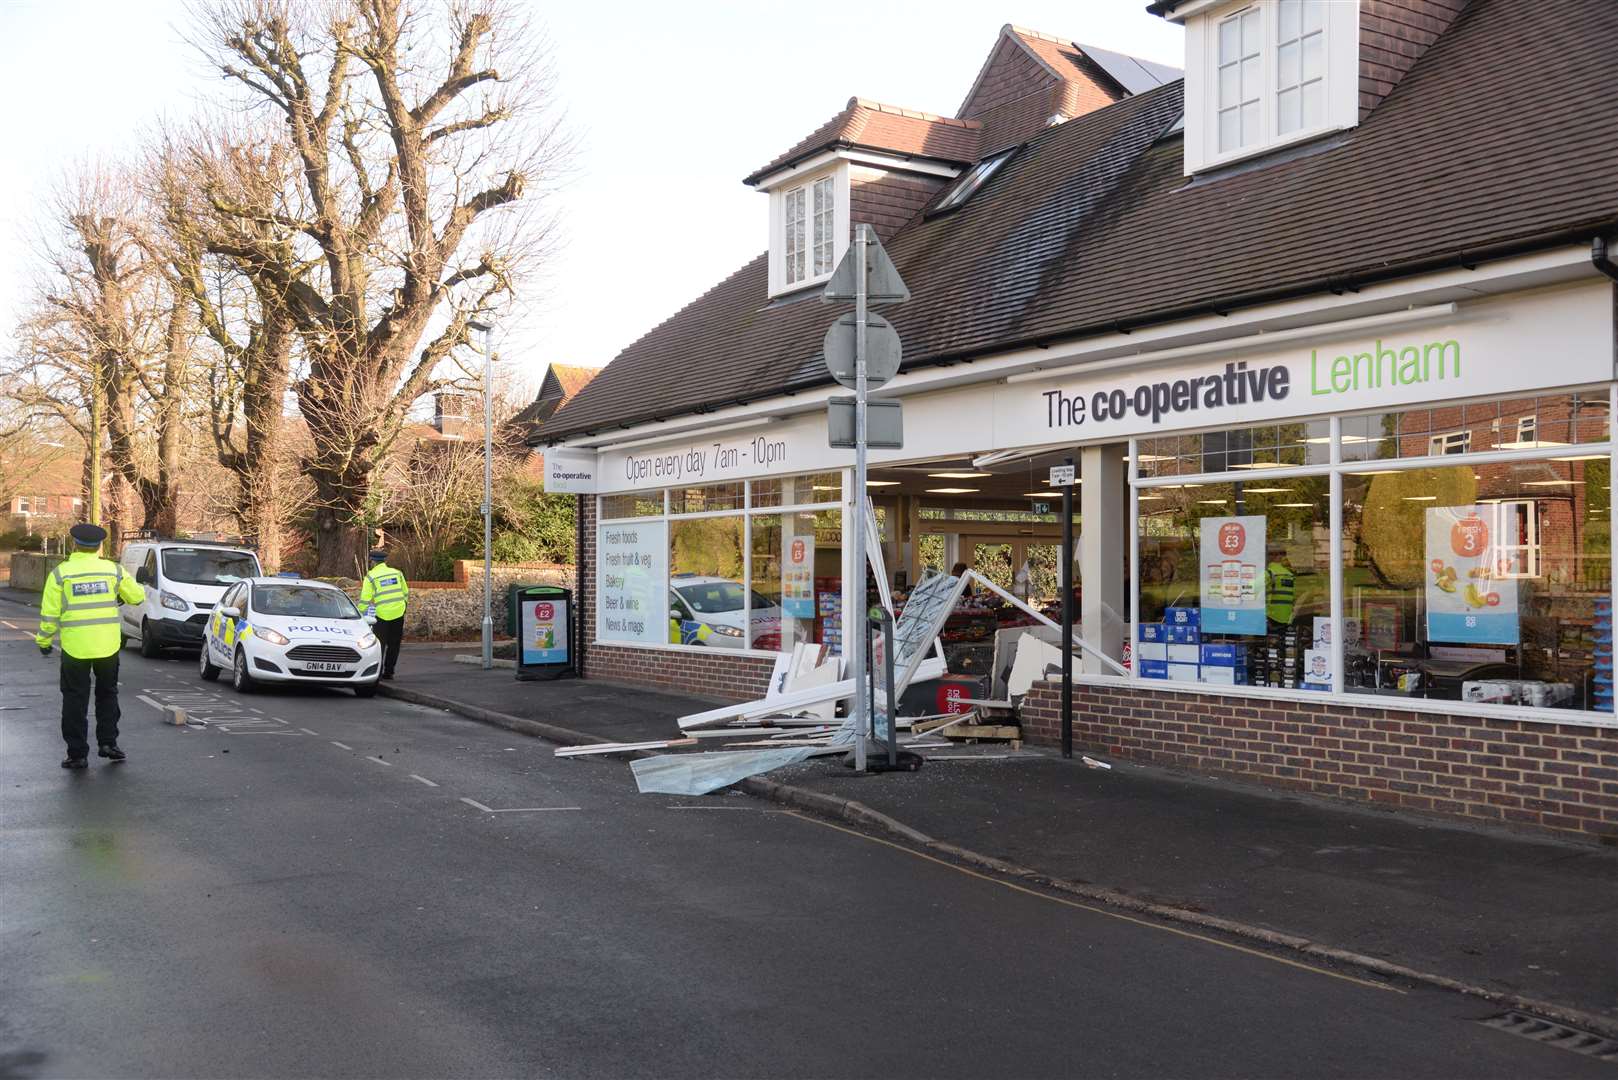 The scene at the Lenham Coop on Wednesday. Picture: Chris Davey. (6420413)